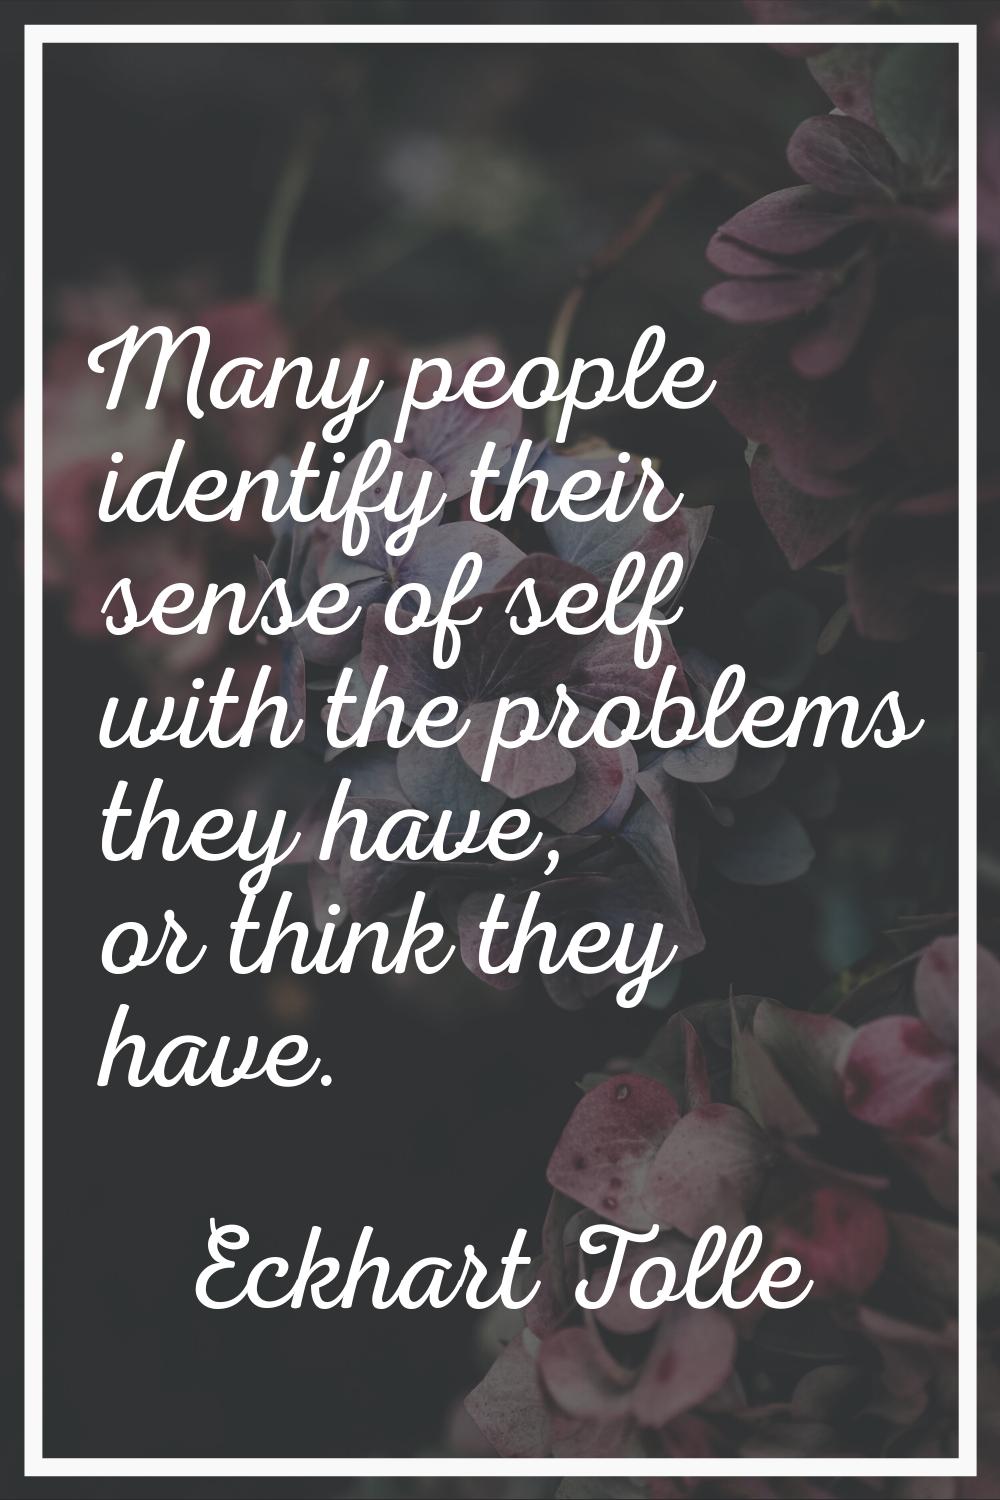 Many people identify their sense of self with the problems they have, or think they have.